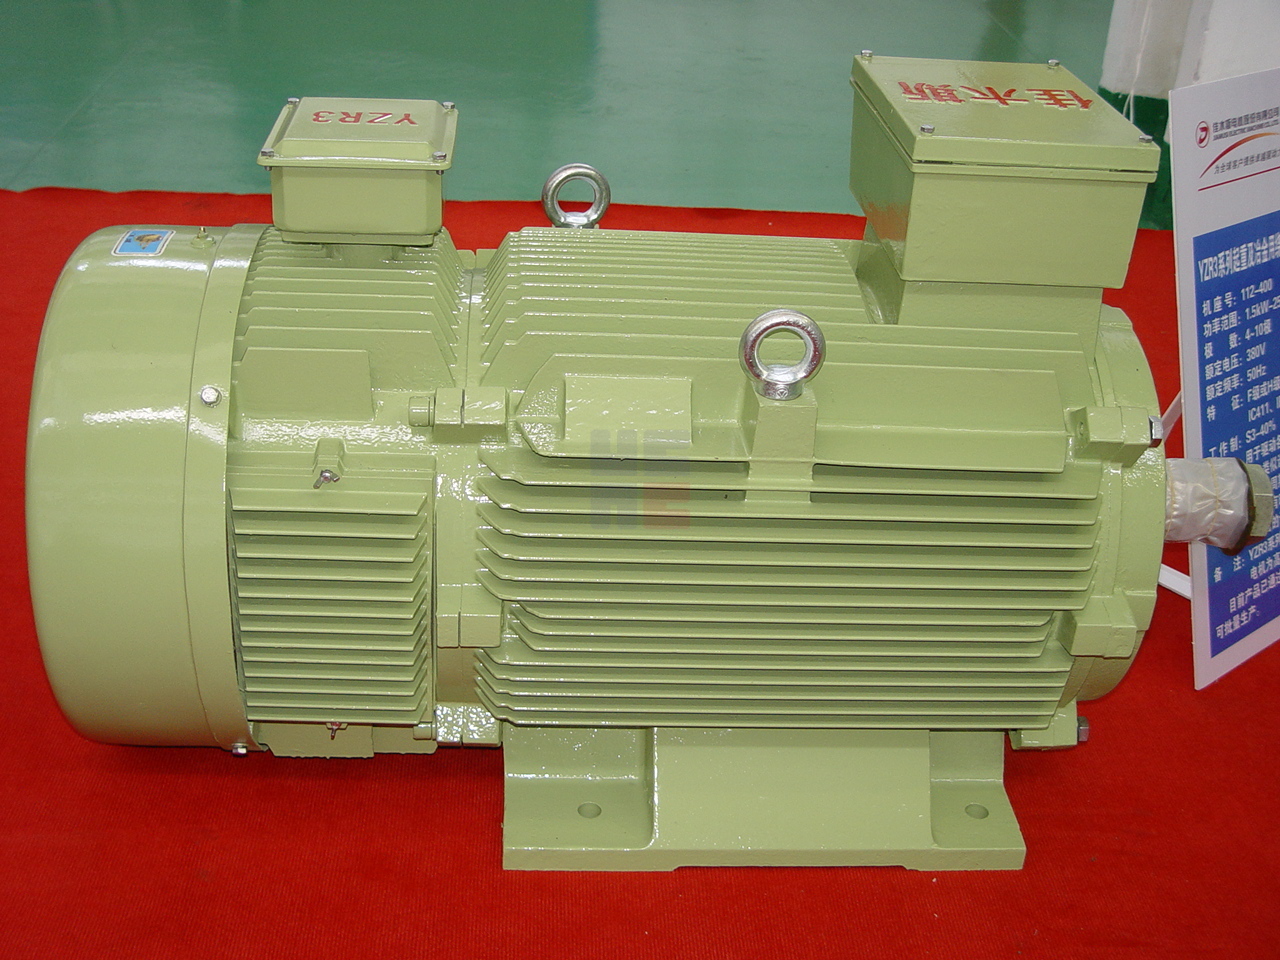 YZR3 Series of Wound Rotor Three-phase Asynchronous Motor for Crane and Metallurgical Application (Frame Size: 112-400)